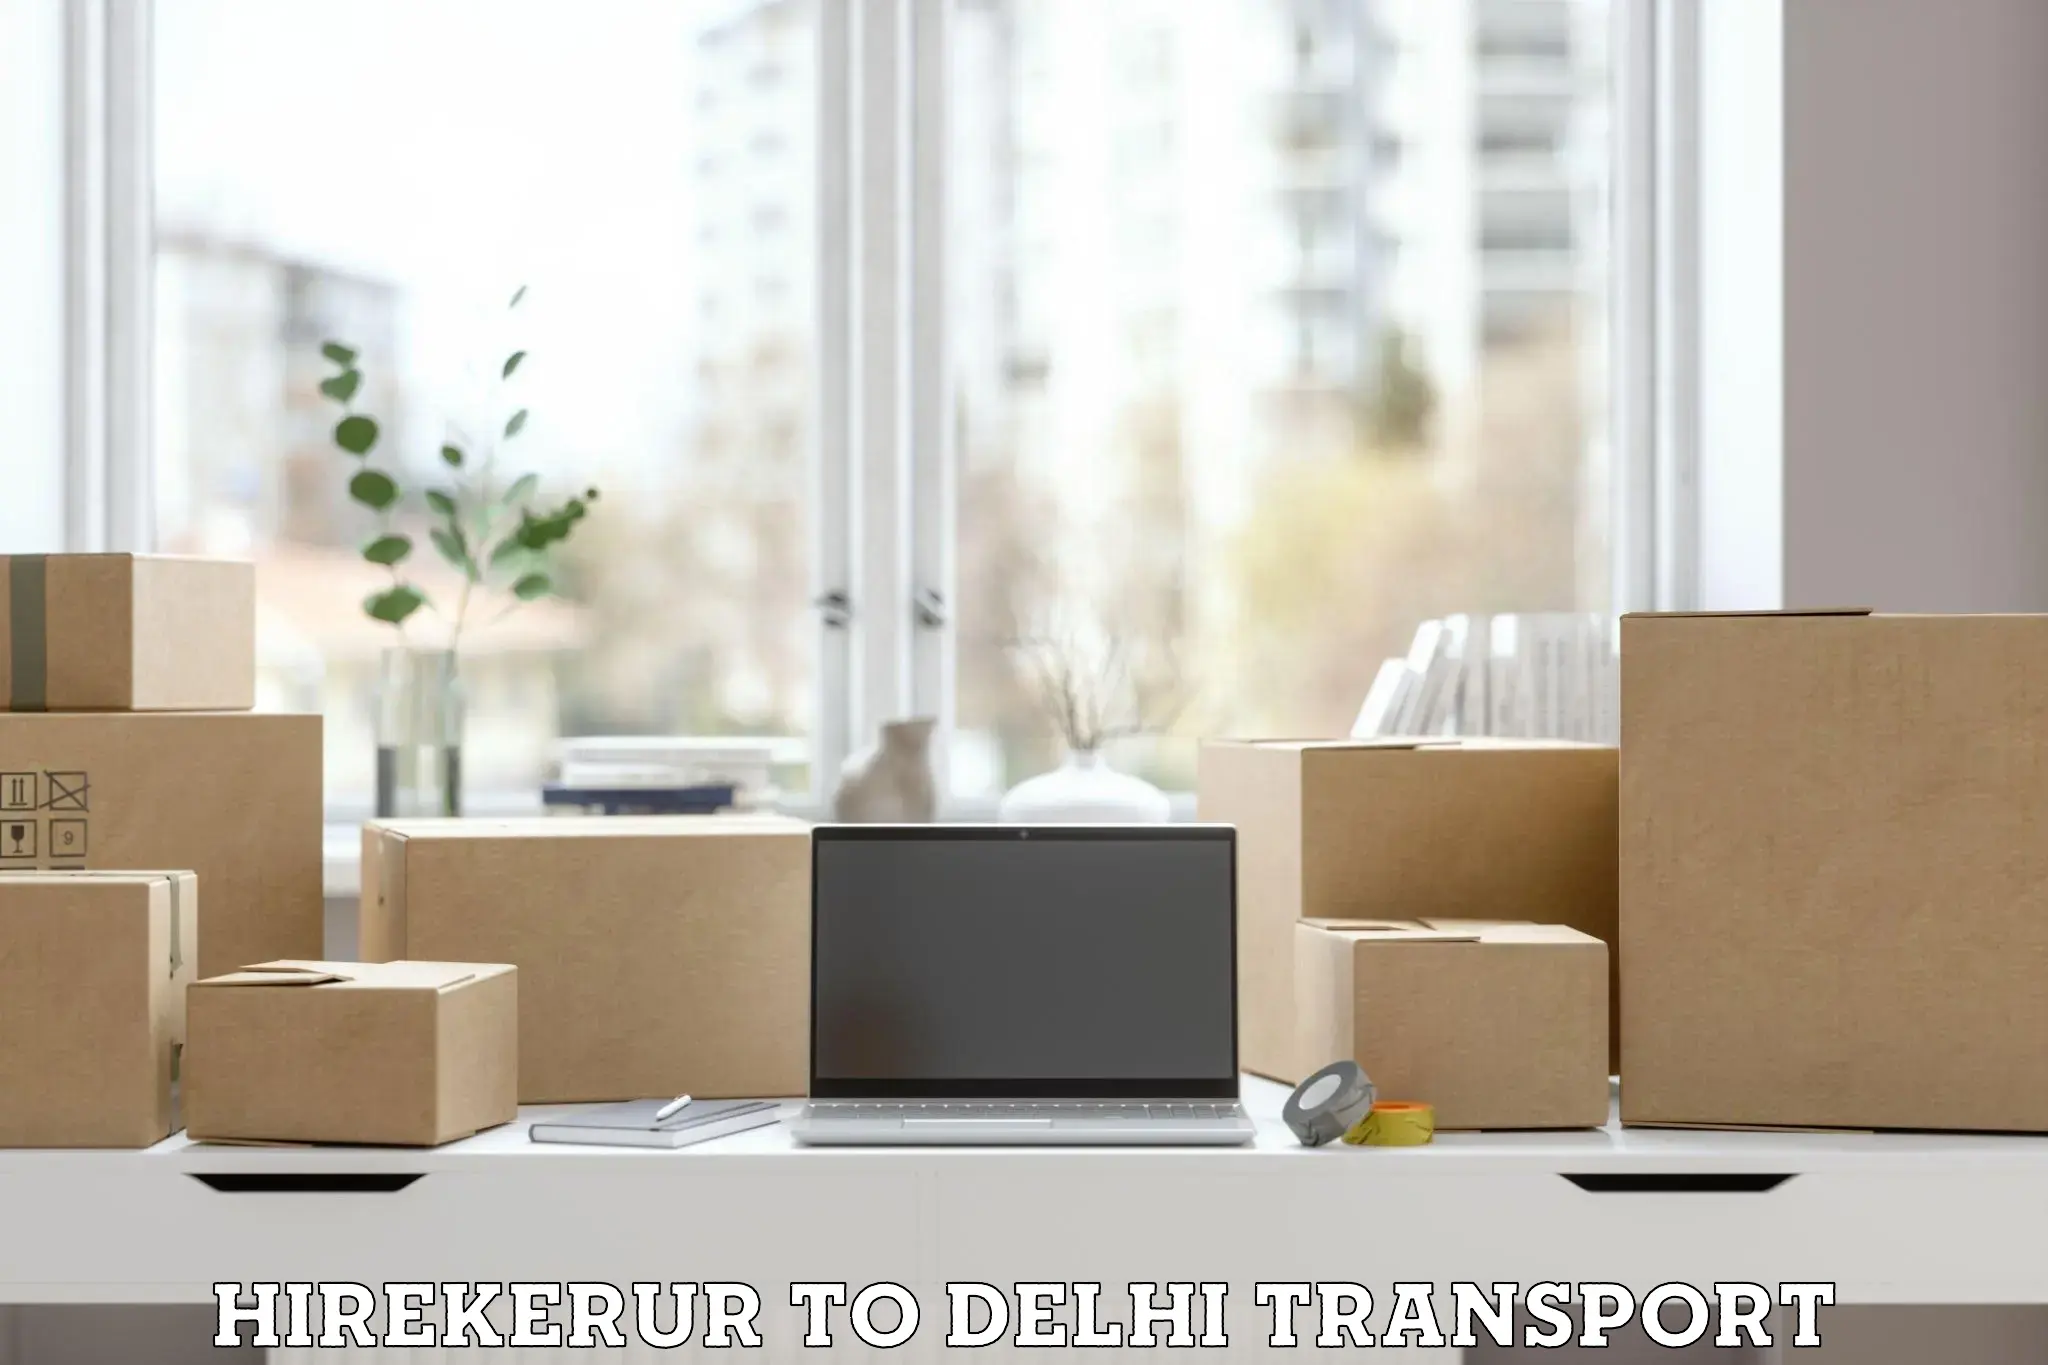 Container transport service Hirekerur to NCR